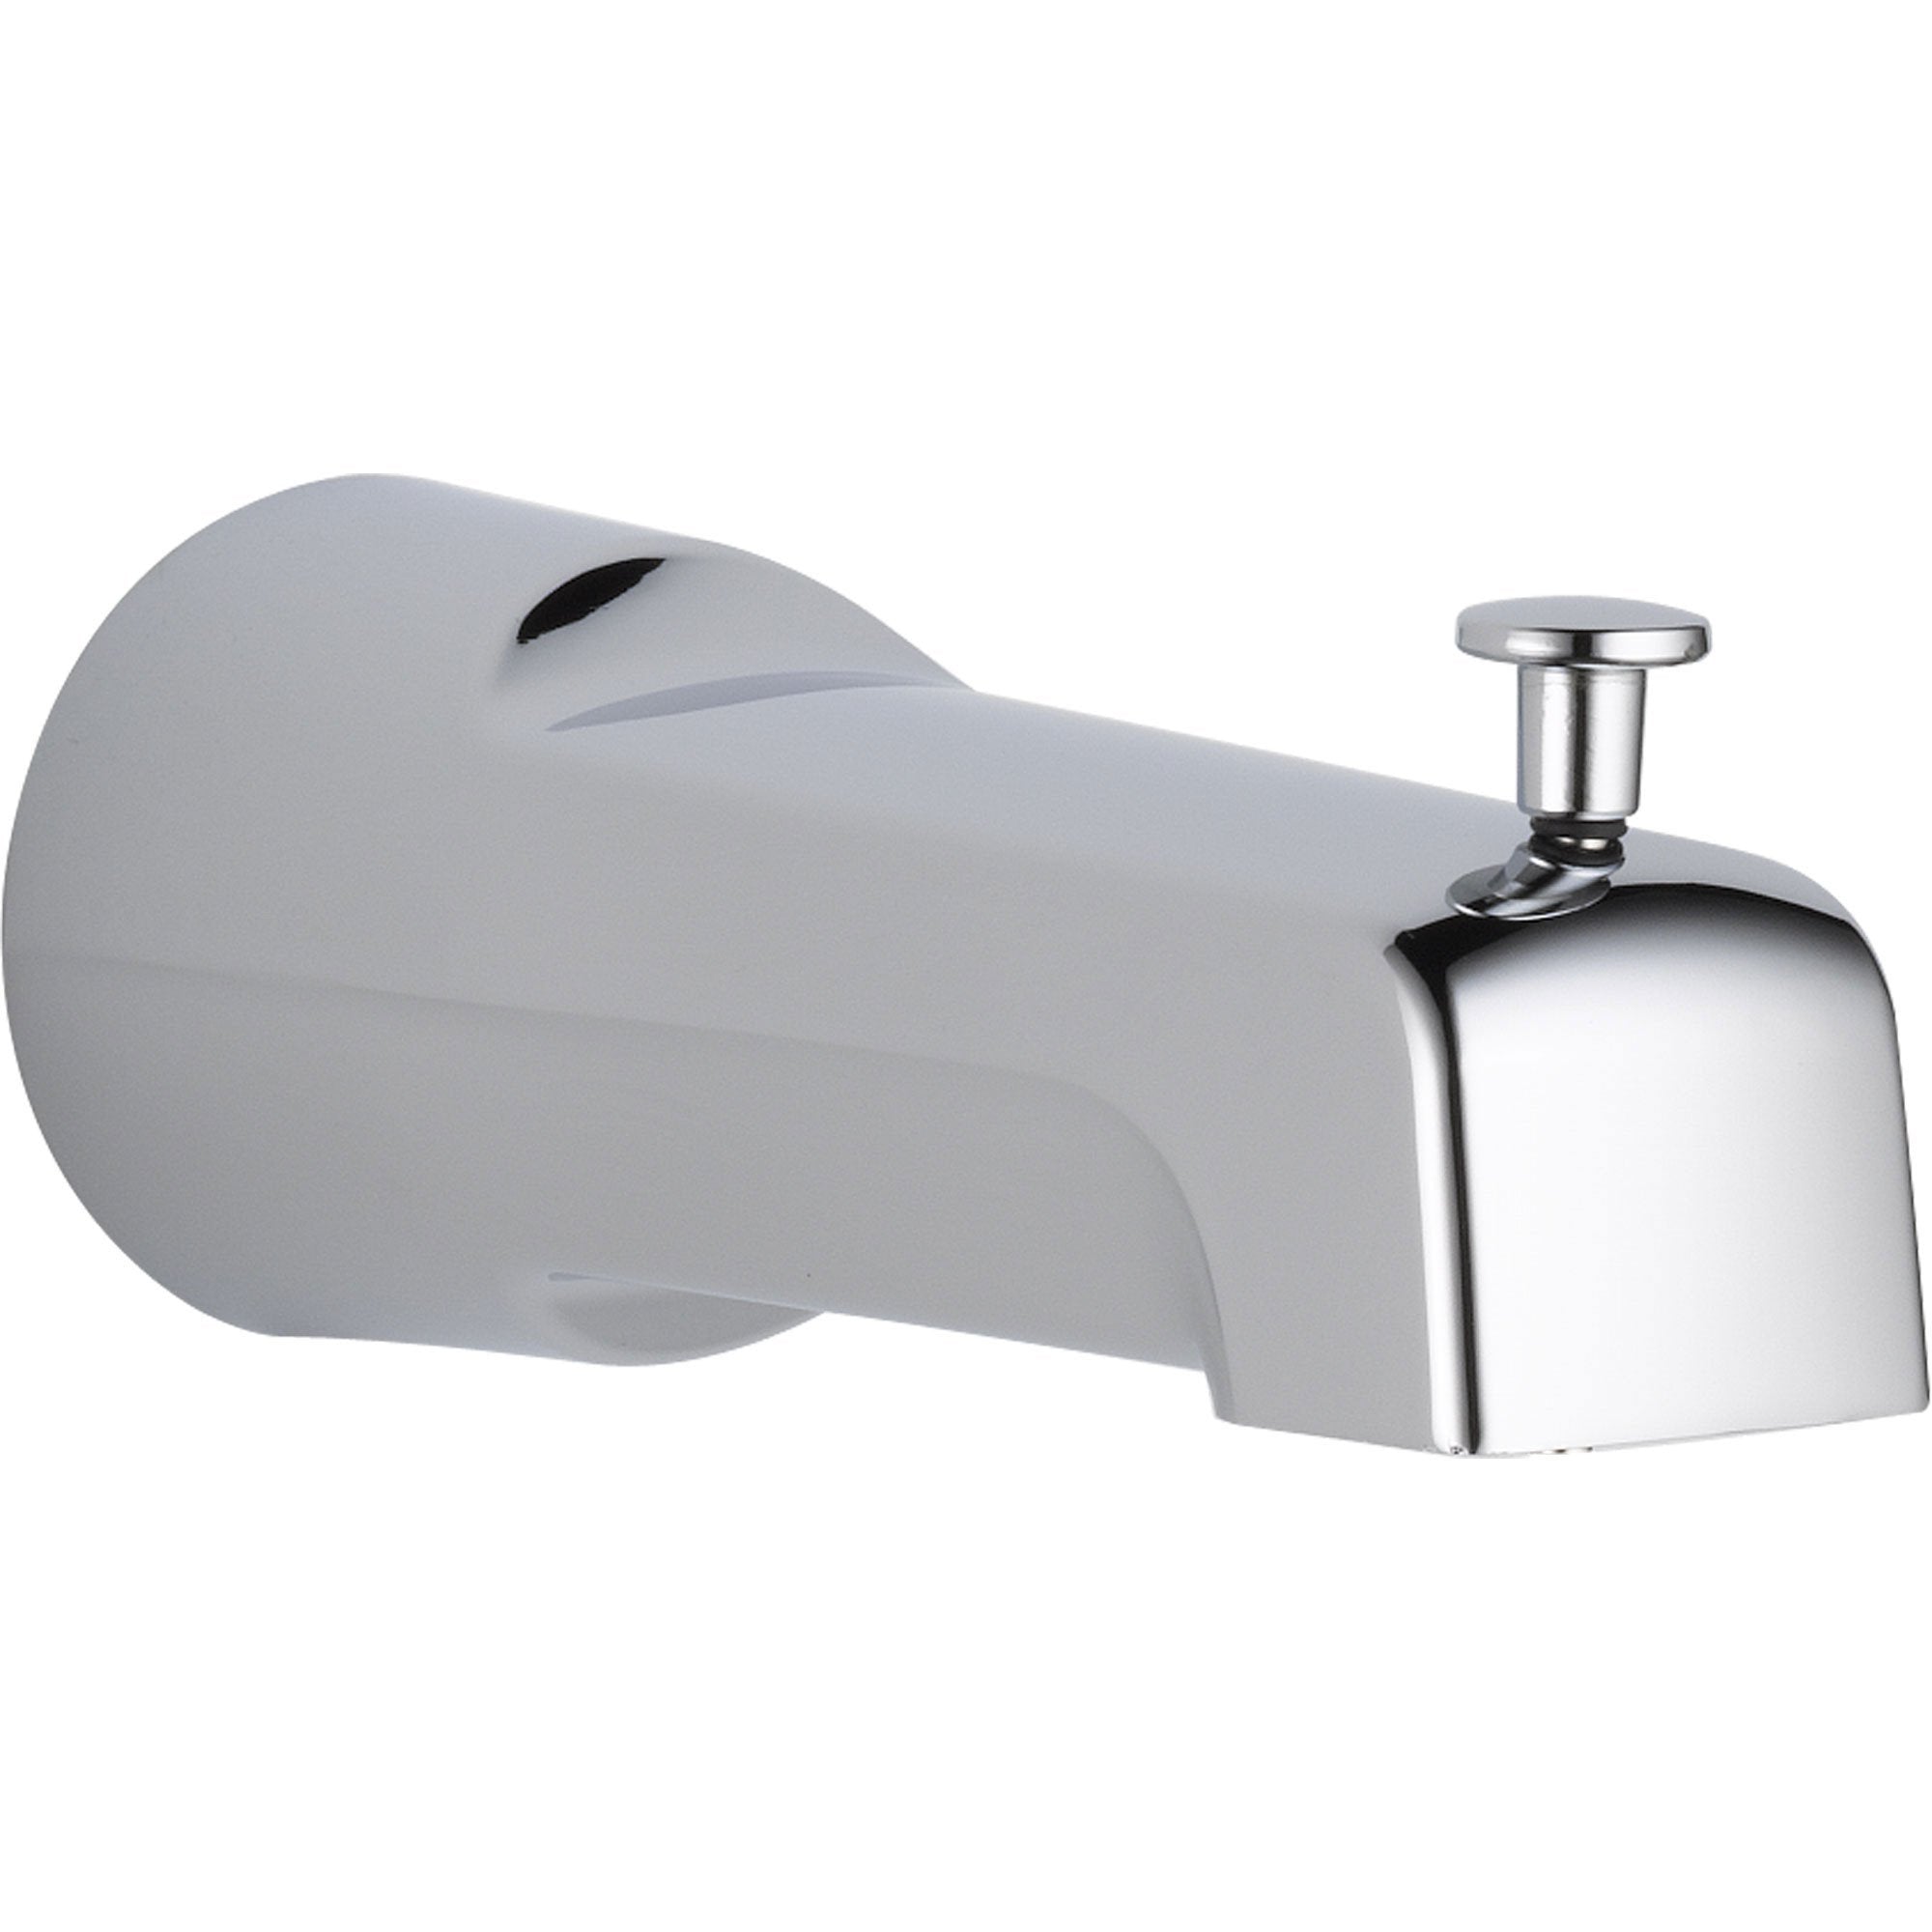 Delta Modern 6.7 In. Long Pull-up Diverter Tub Spout in Chrome 561298